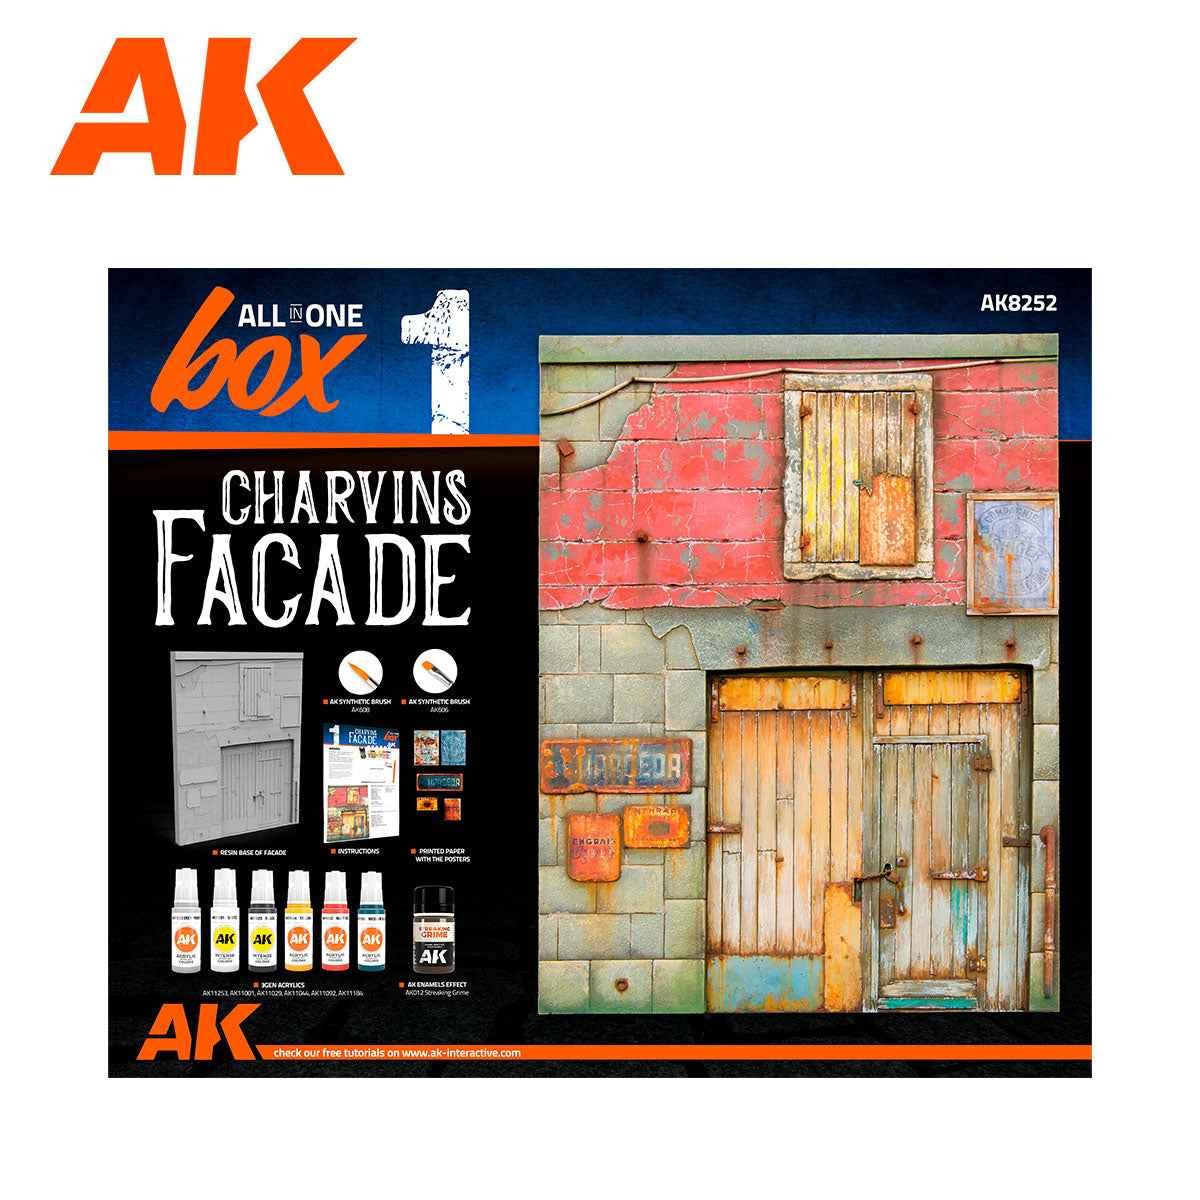 AK: All In One Set -Box 1- Charvins Facade